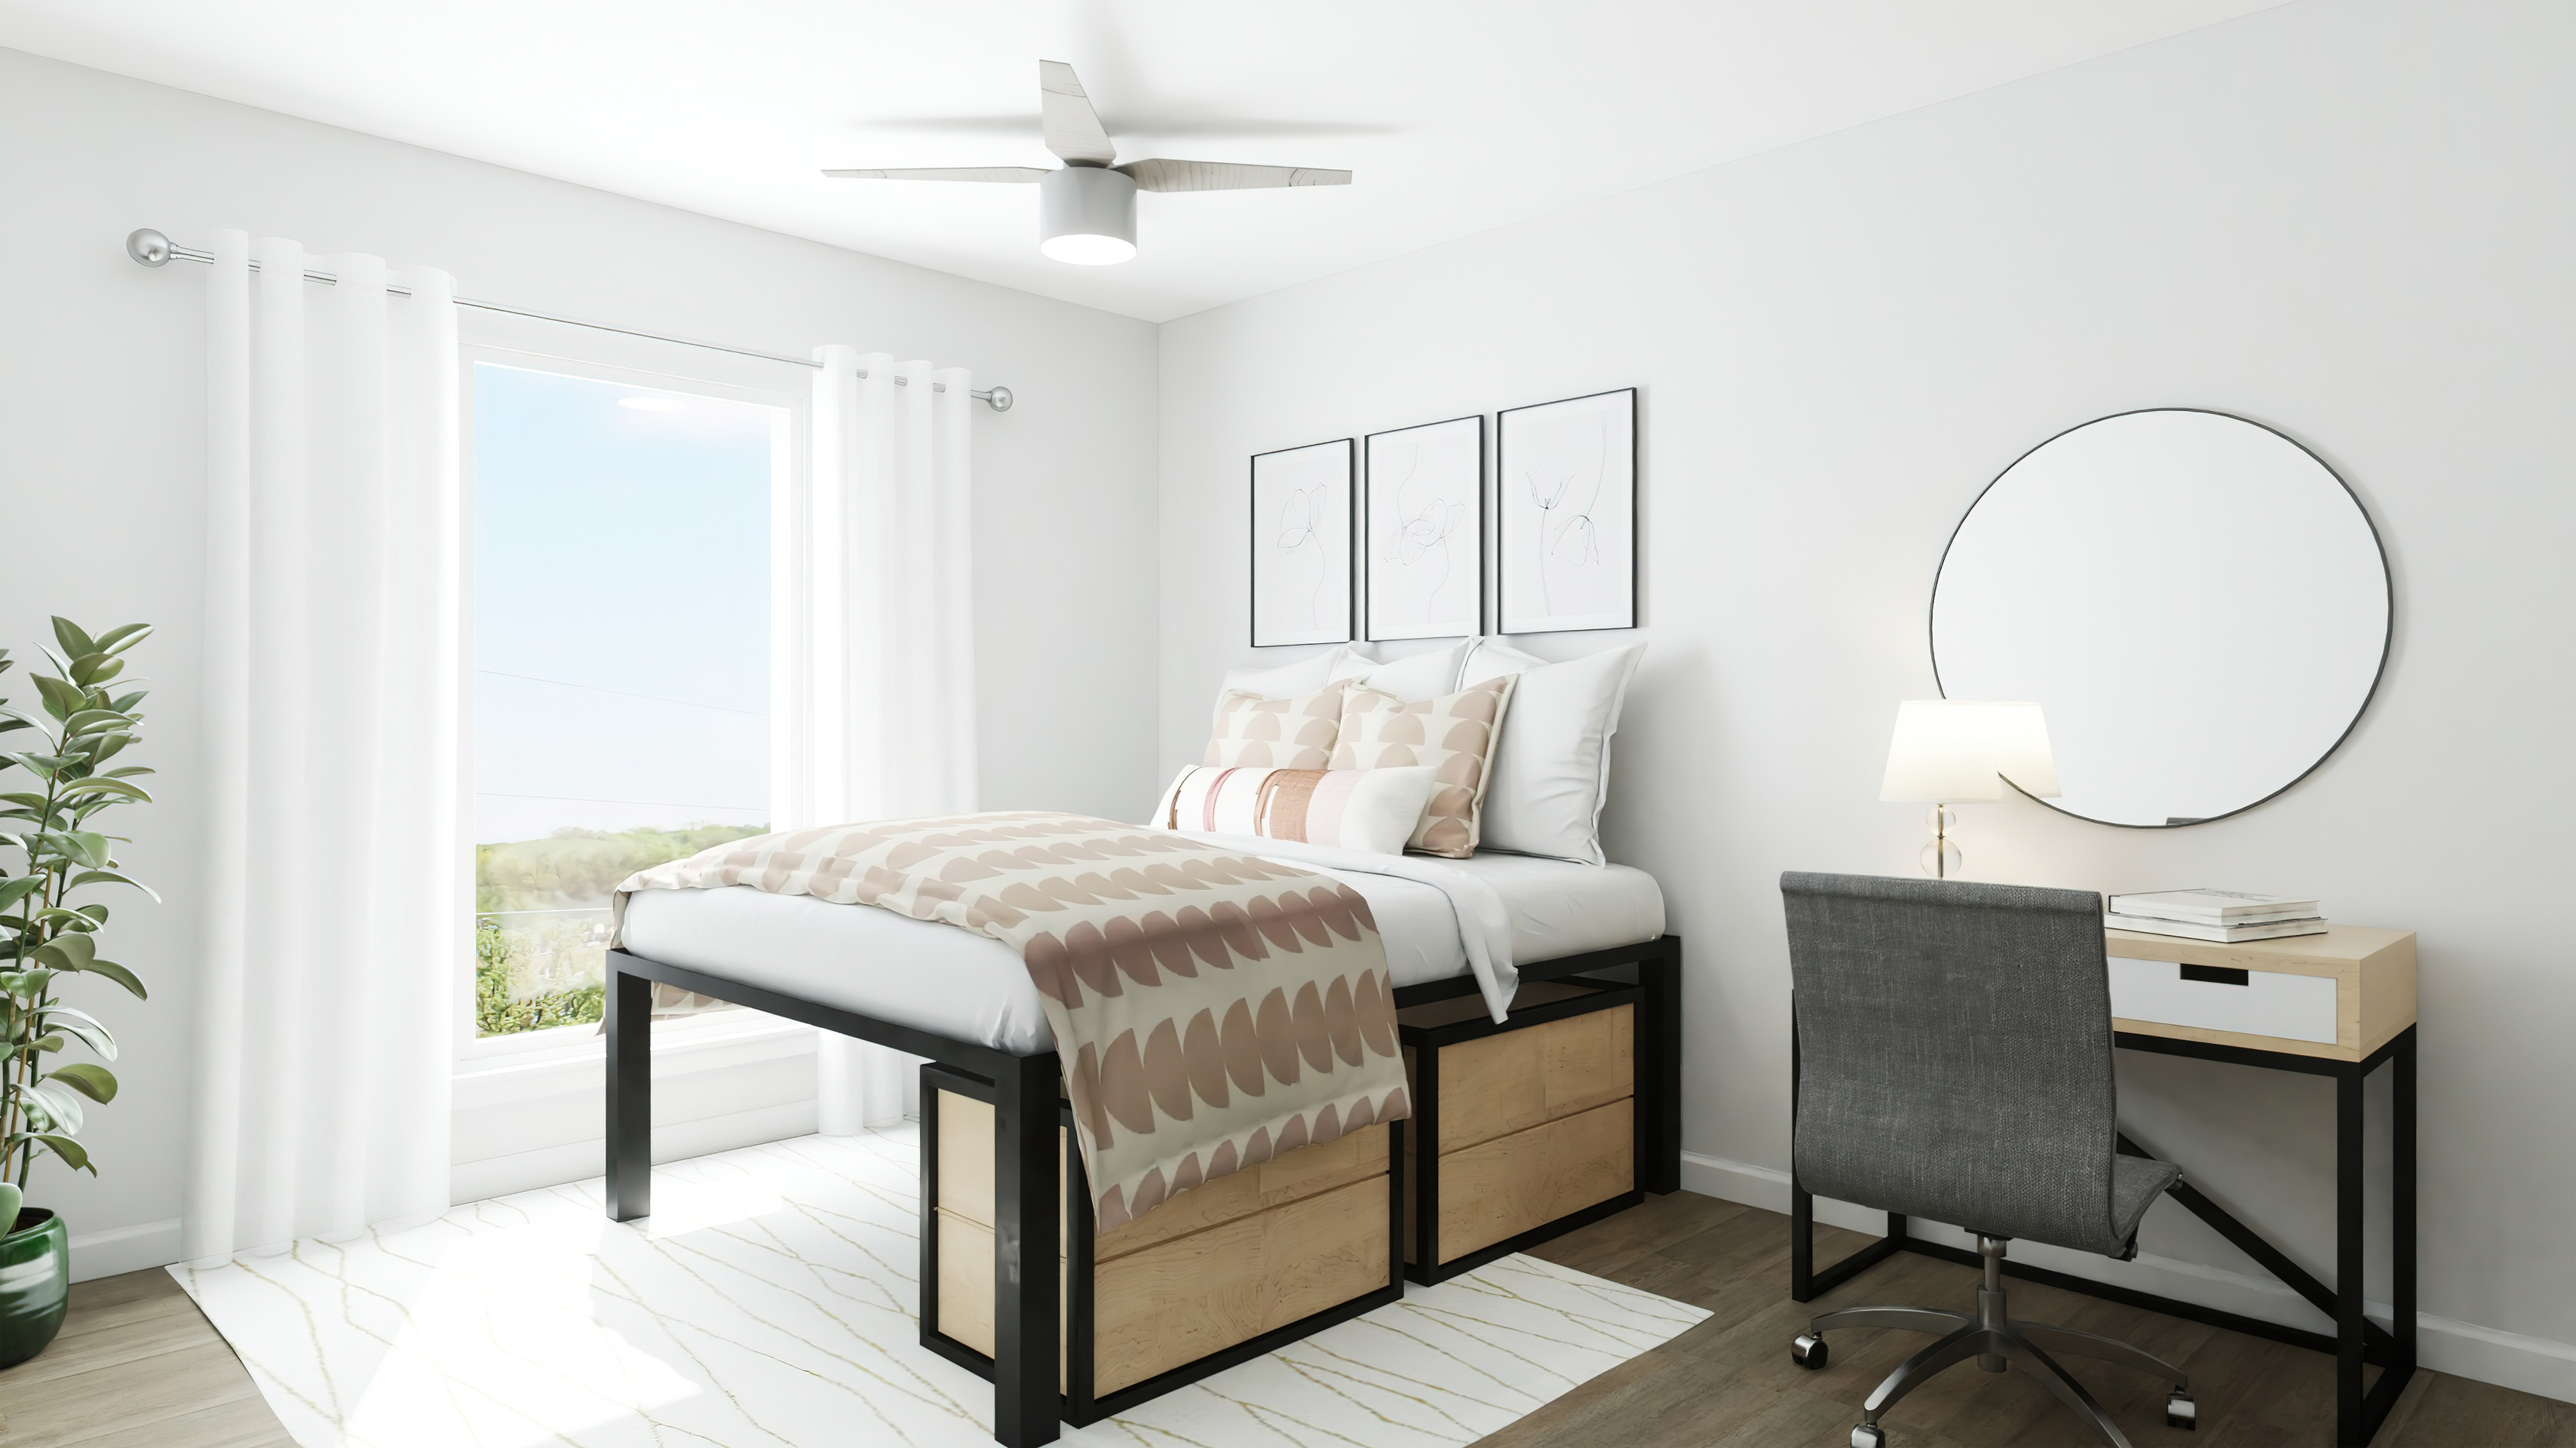 Representative rendering of bedrooms at Rambler, featuring a pillow-top mattress and two under-bed/stackable dresser drawers.